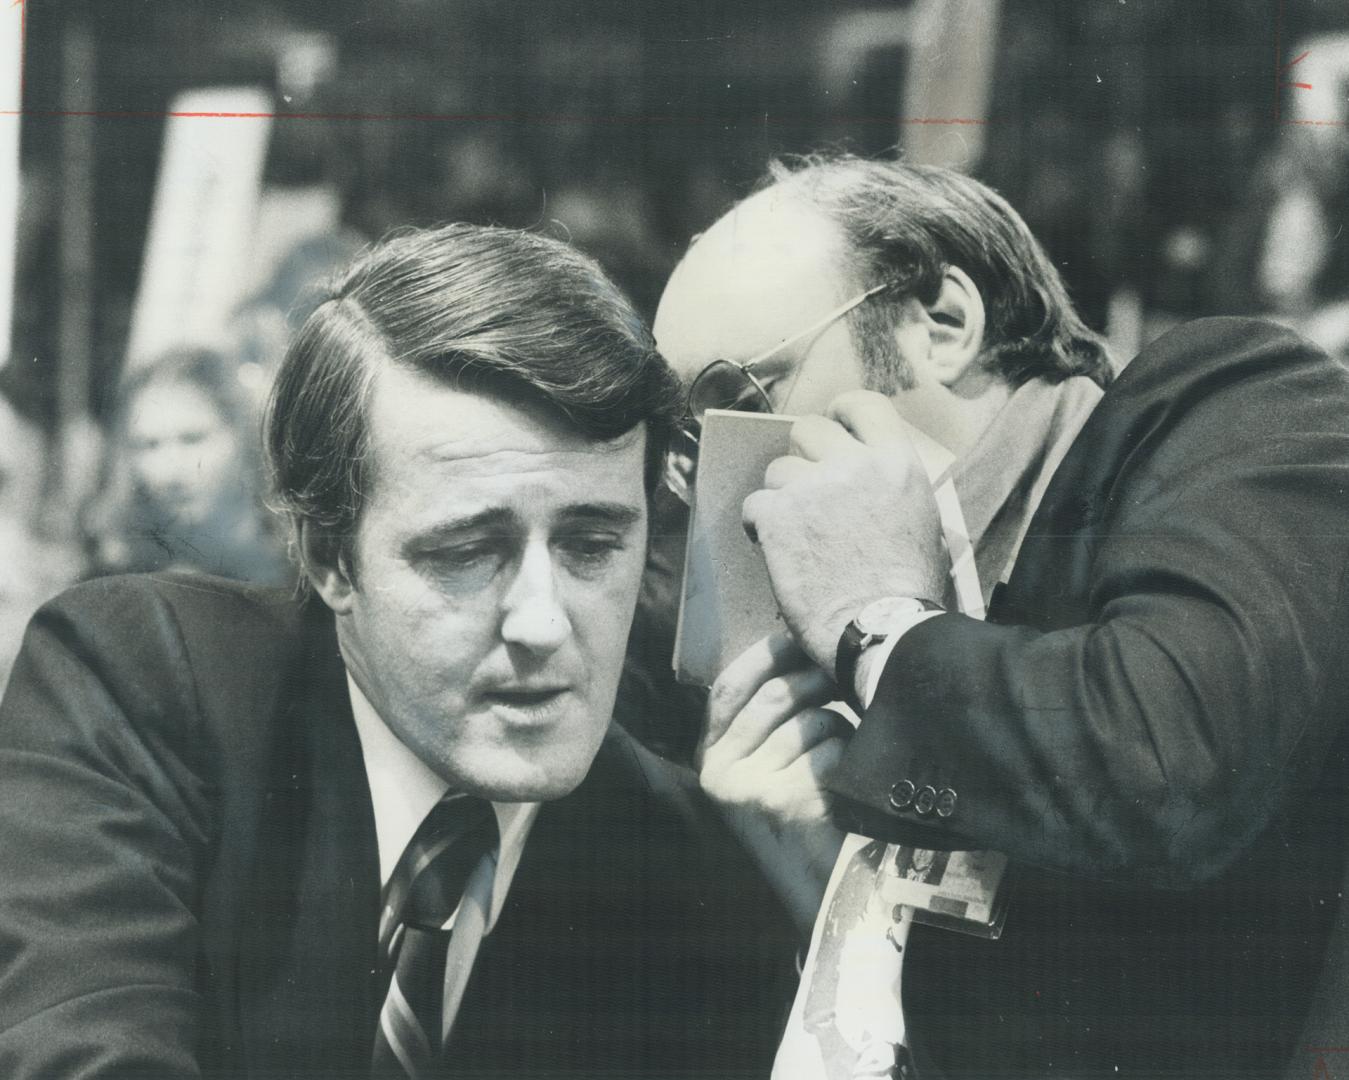 Brian Mulroney, conferring with aide during leadership race he lost to Joe Clark, is touted as cabinet material